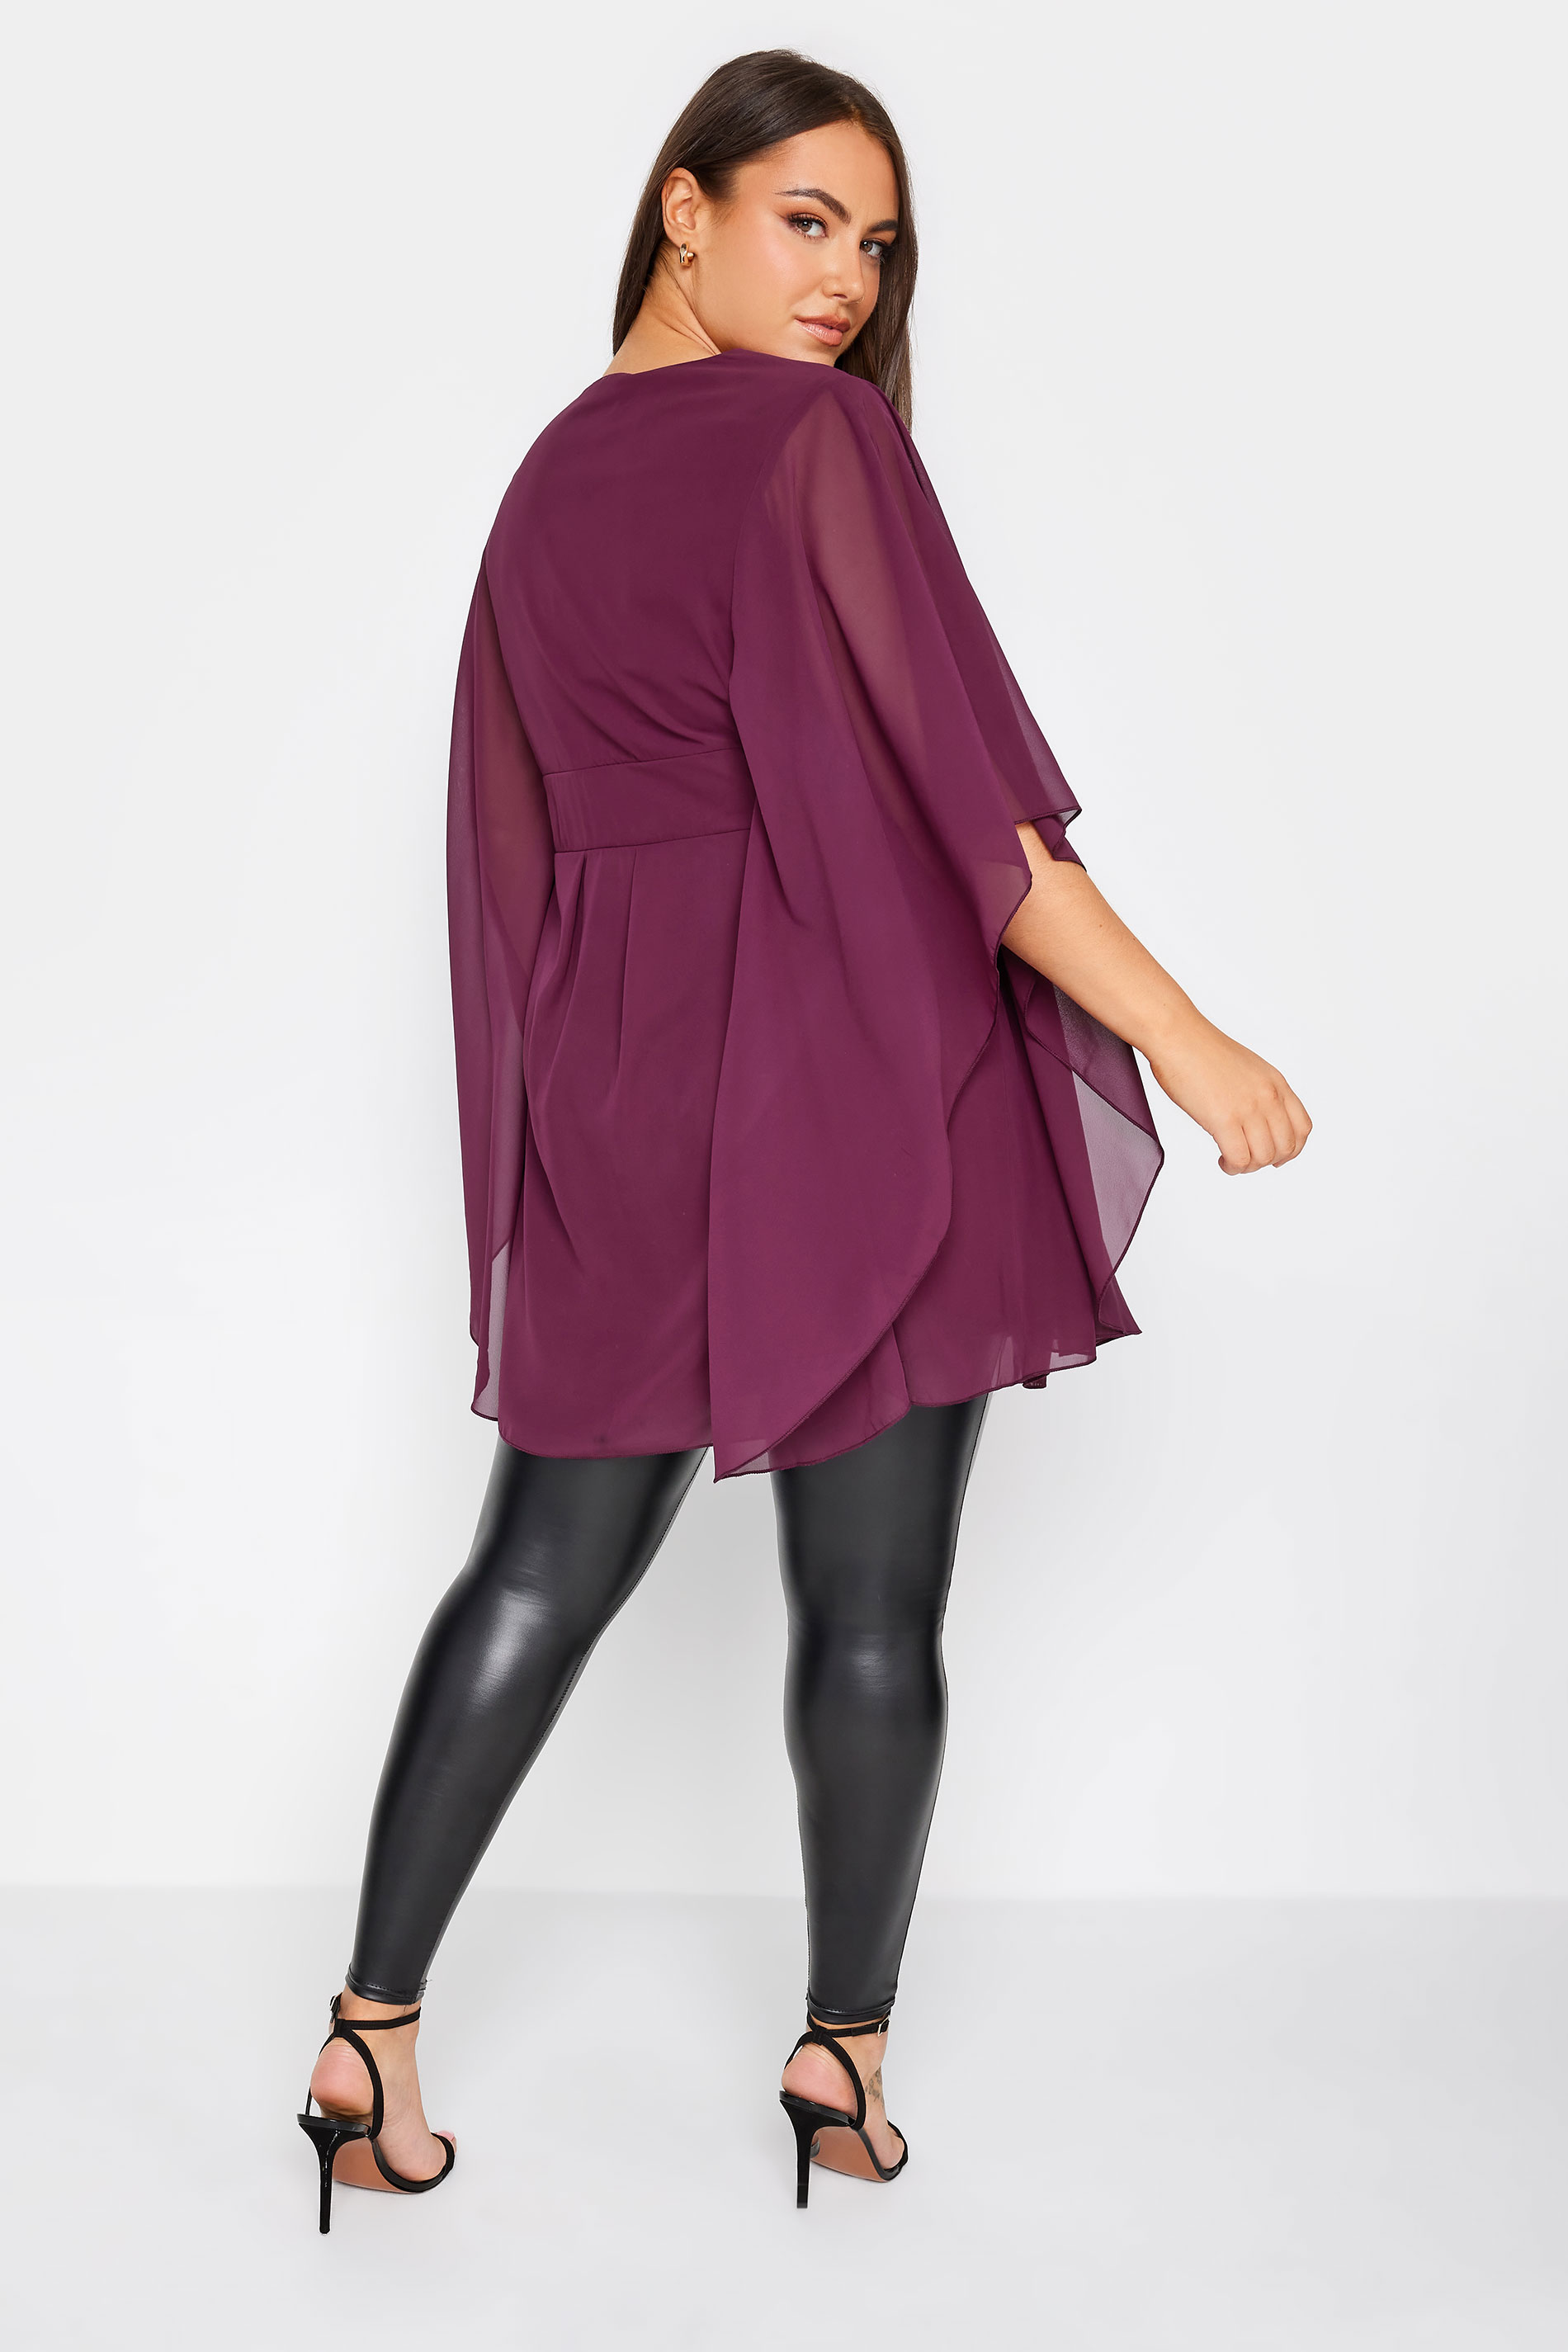 LUXE Plus Size Purple Hand Embellished Waist Cape Top | Yours Clothing 3